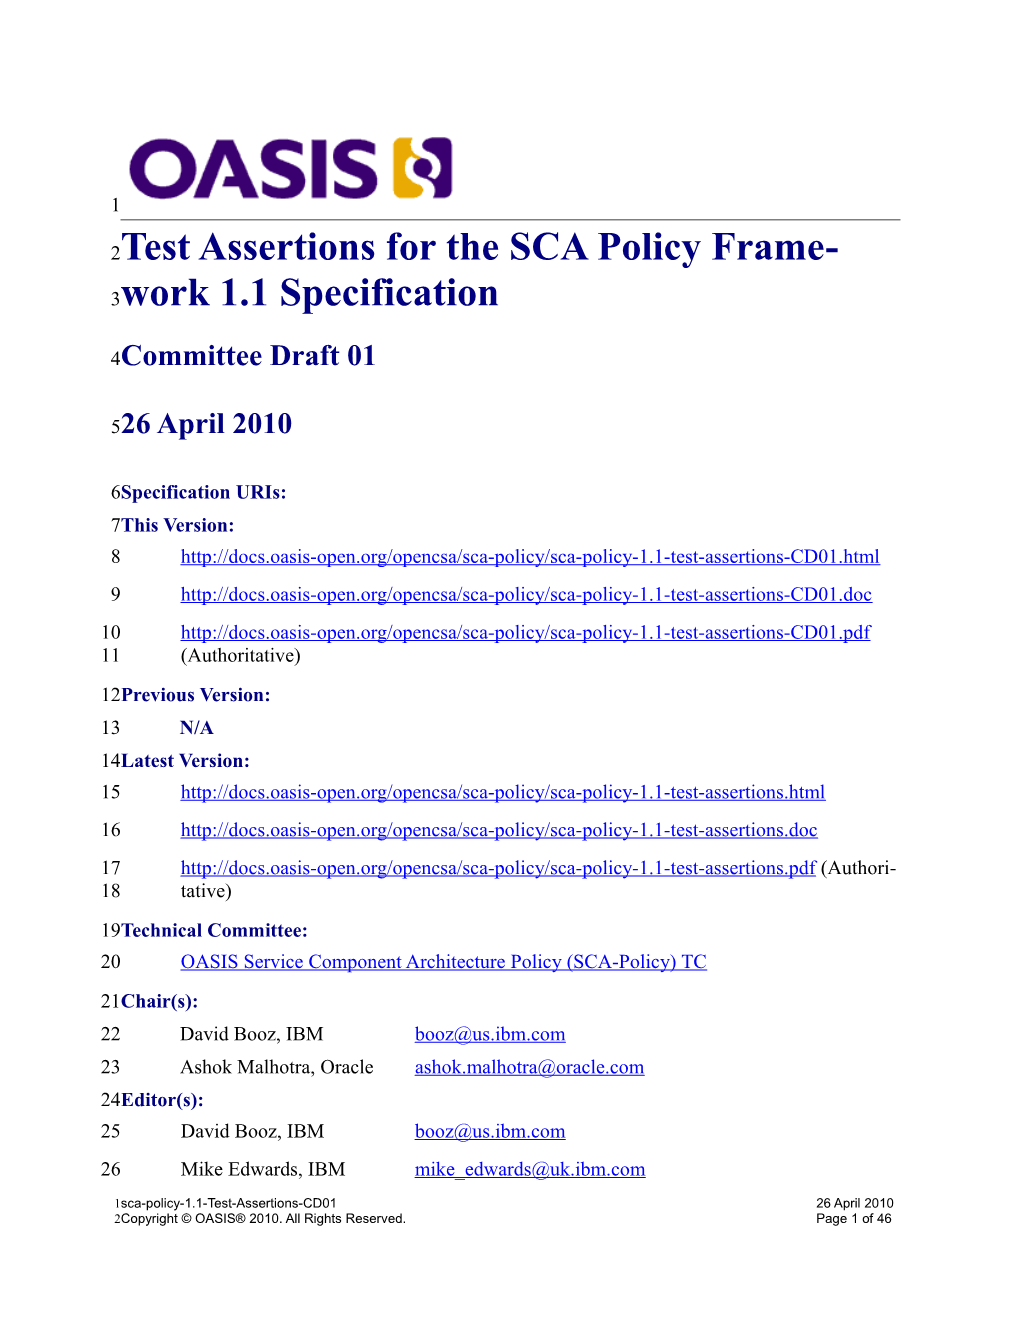 Test Assertions for the SCA Policy FW Specification 1.1